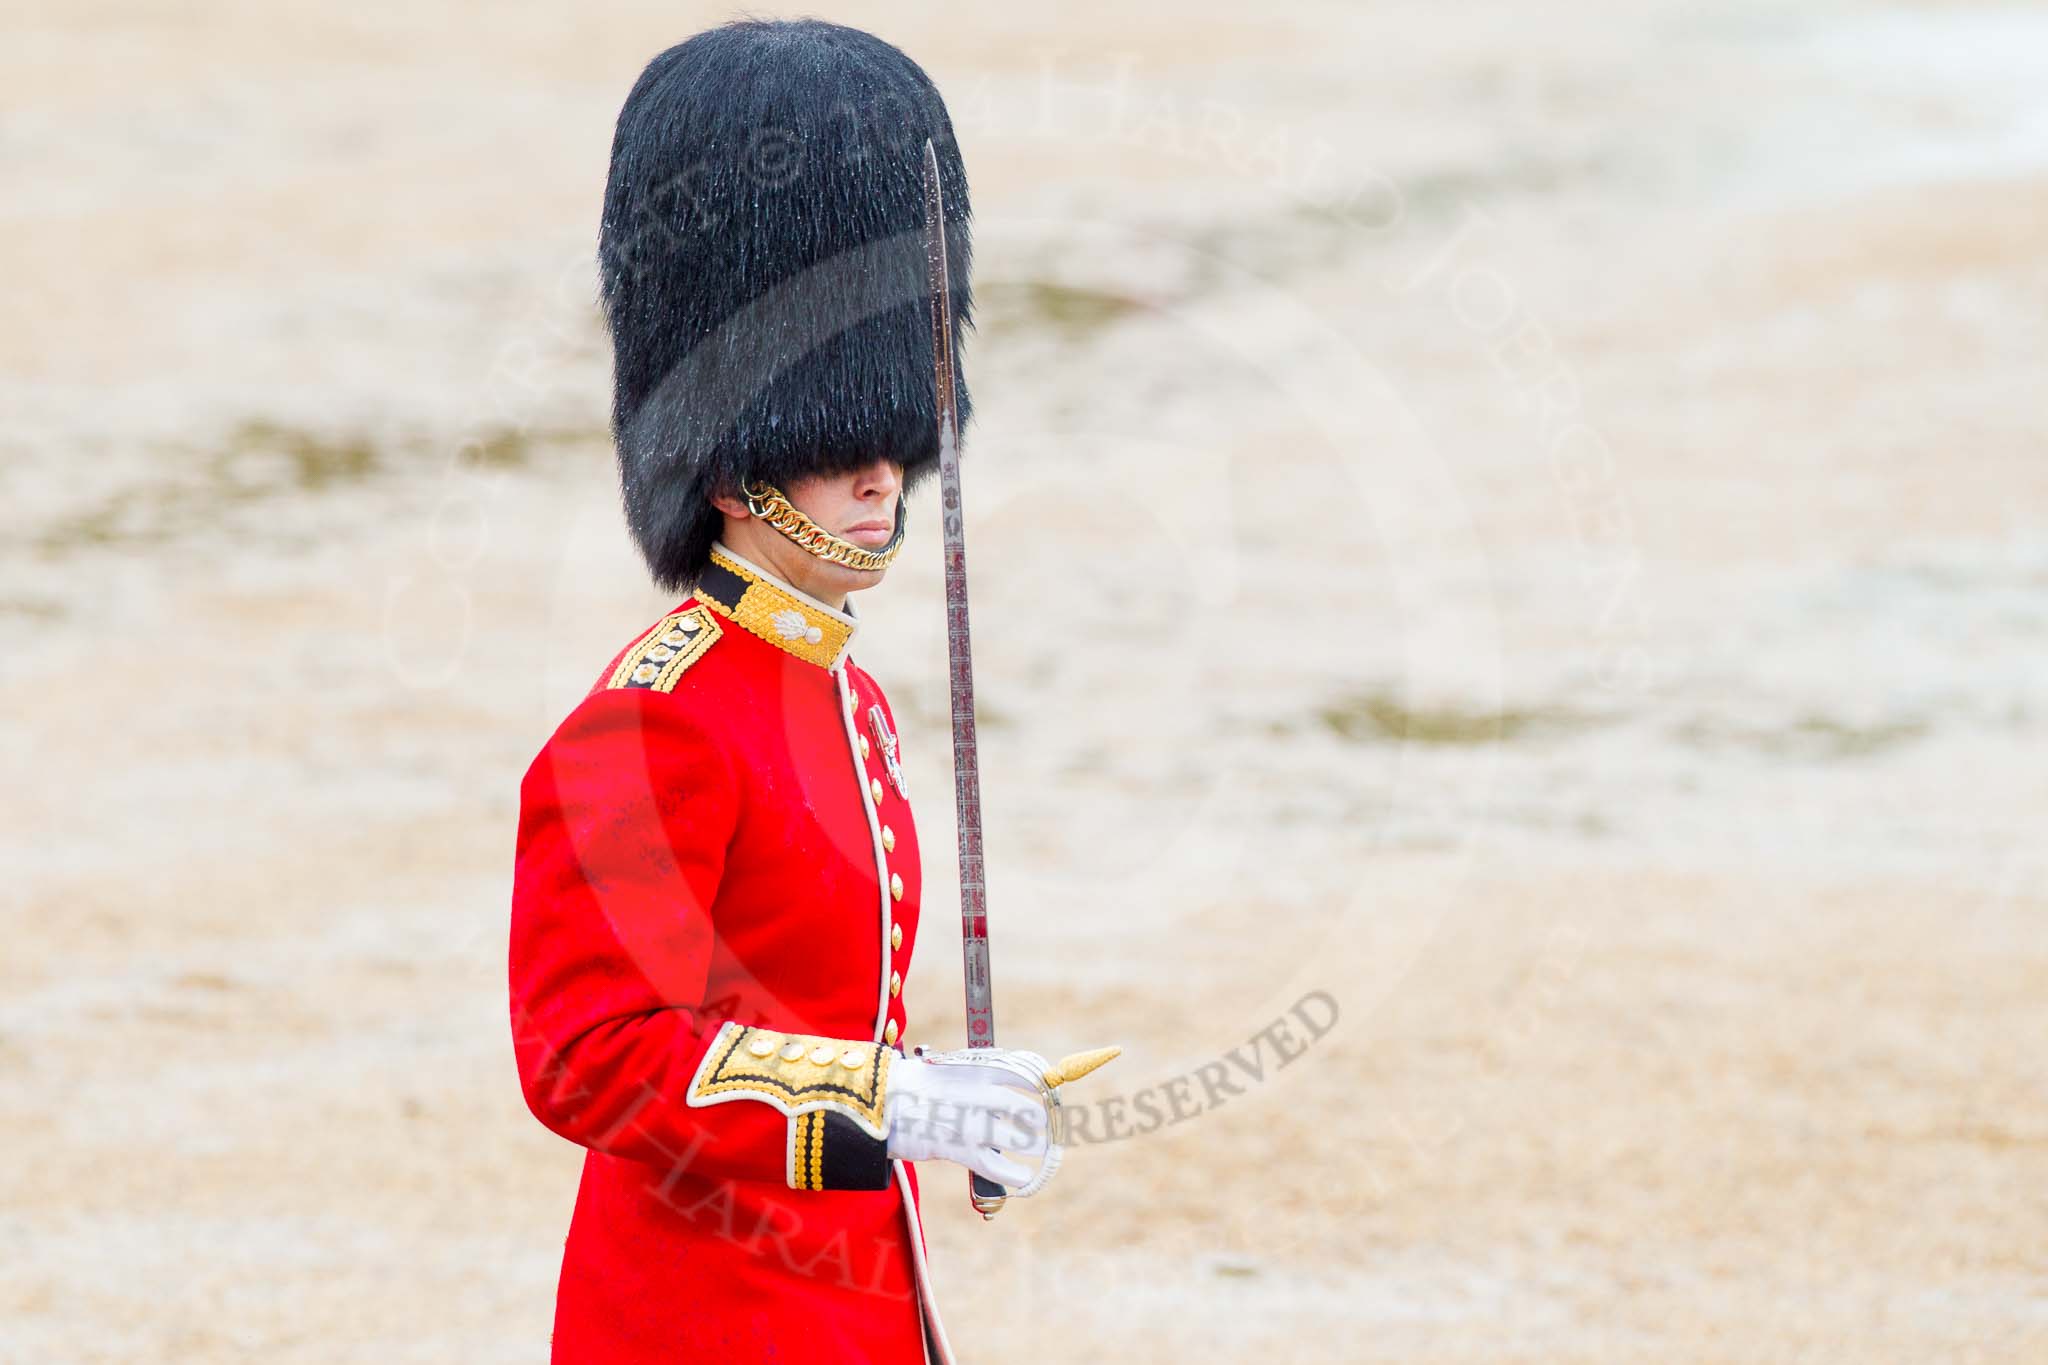 The Colonel's Review 2014.
Horse Guards Parade, Westminster,
London,

United Kingdom,
on 07 June 2014 at 11:36, image #516